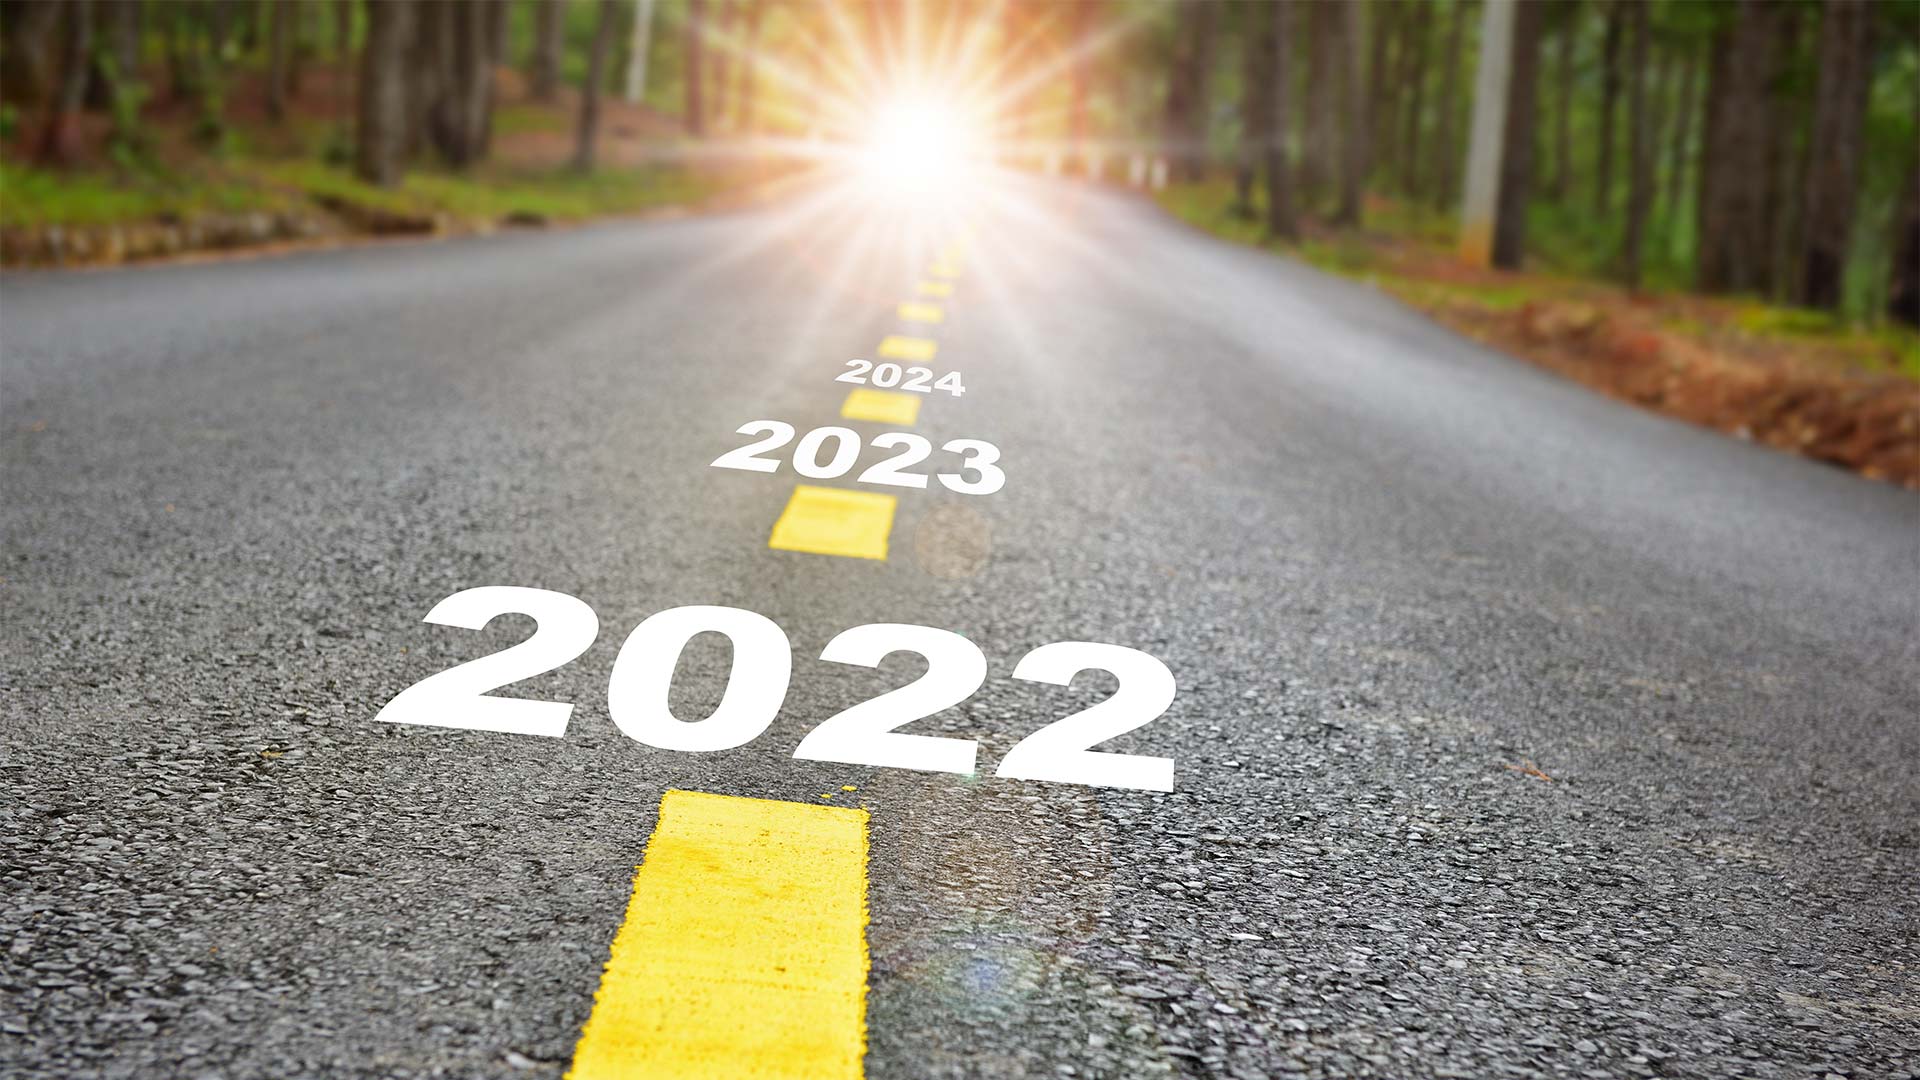 2022 to 2024 on a road